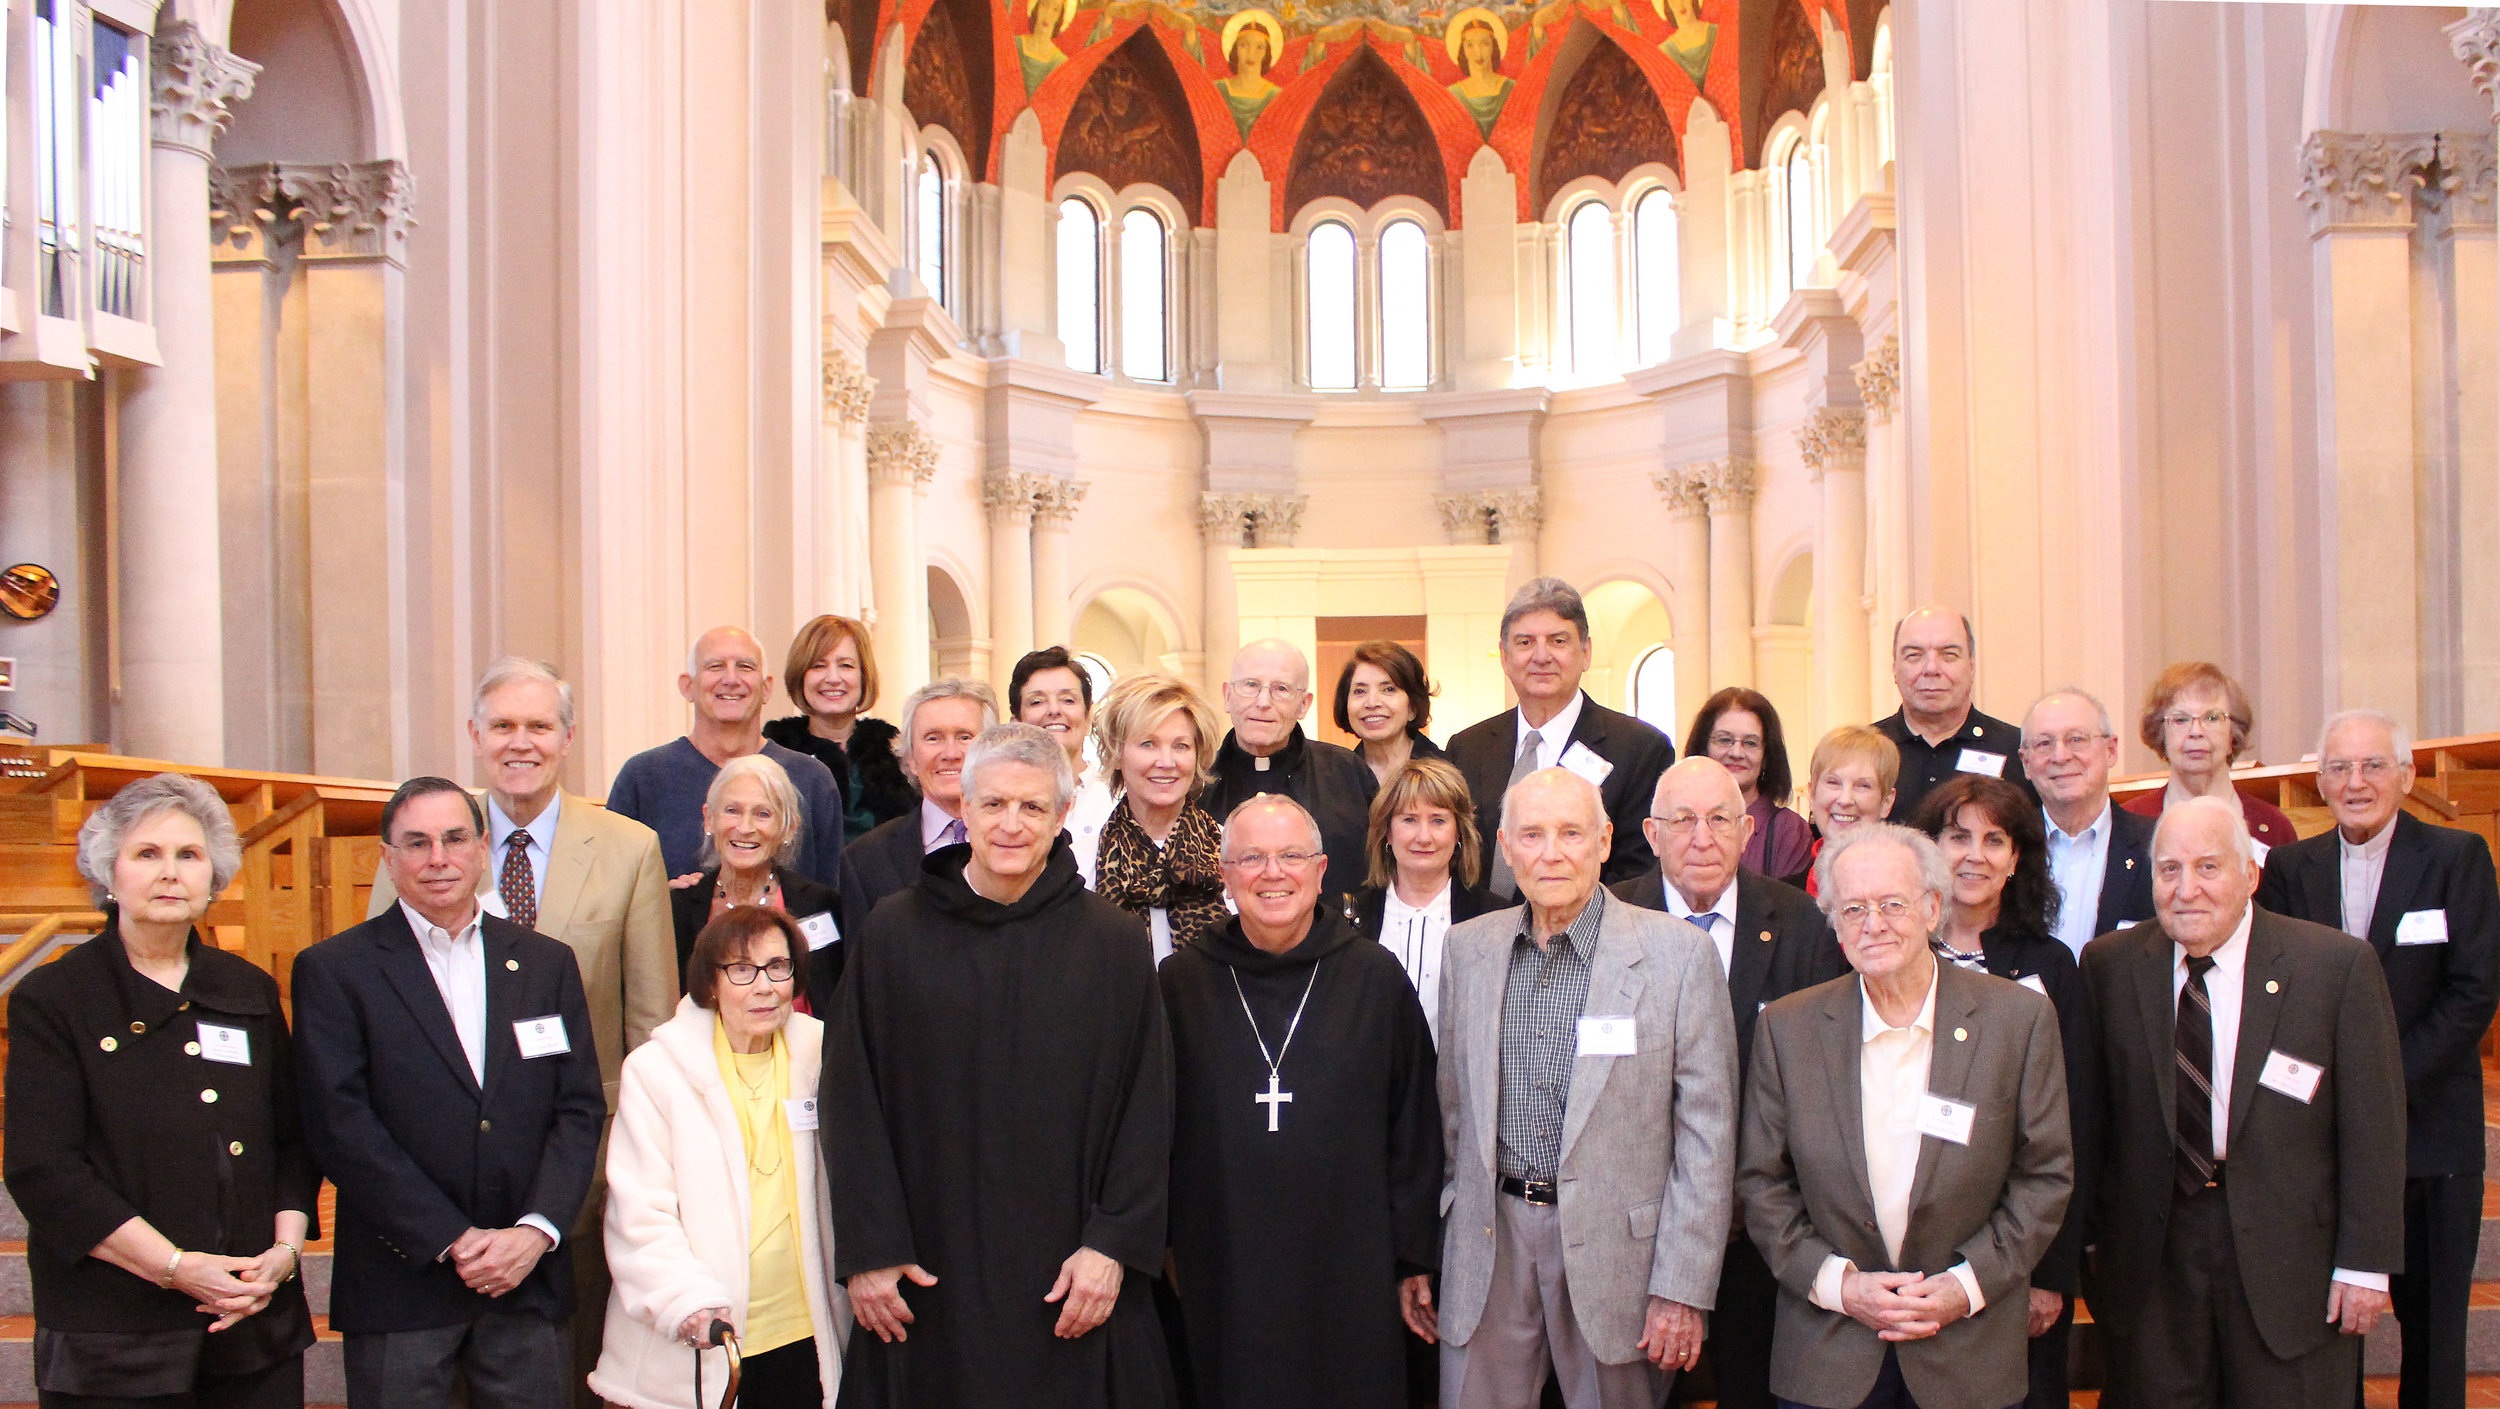 On March 21, 2018, Abbot Justin Brown and Fr. Gregory Boquet inducted new members into the Saint Benedict Society in the Abbey Church.